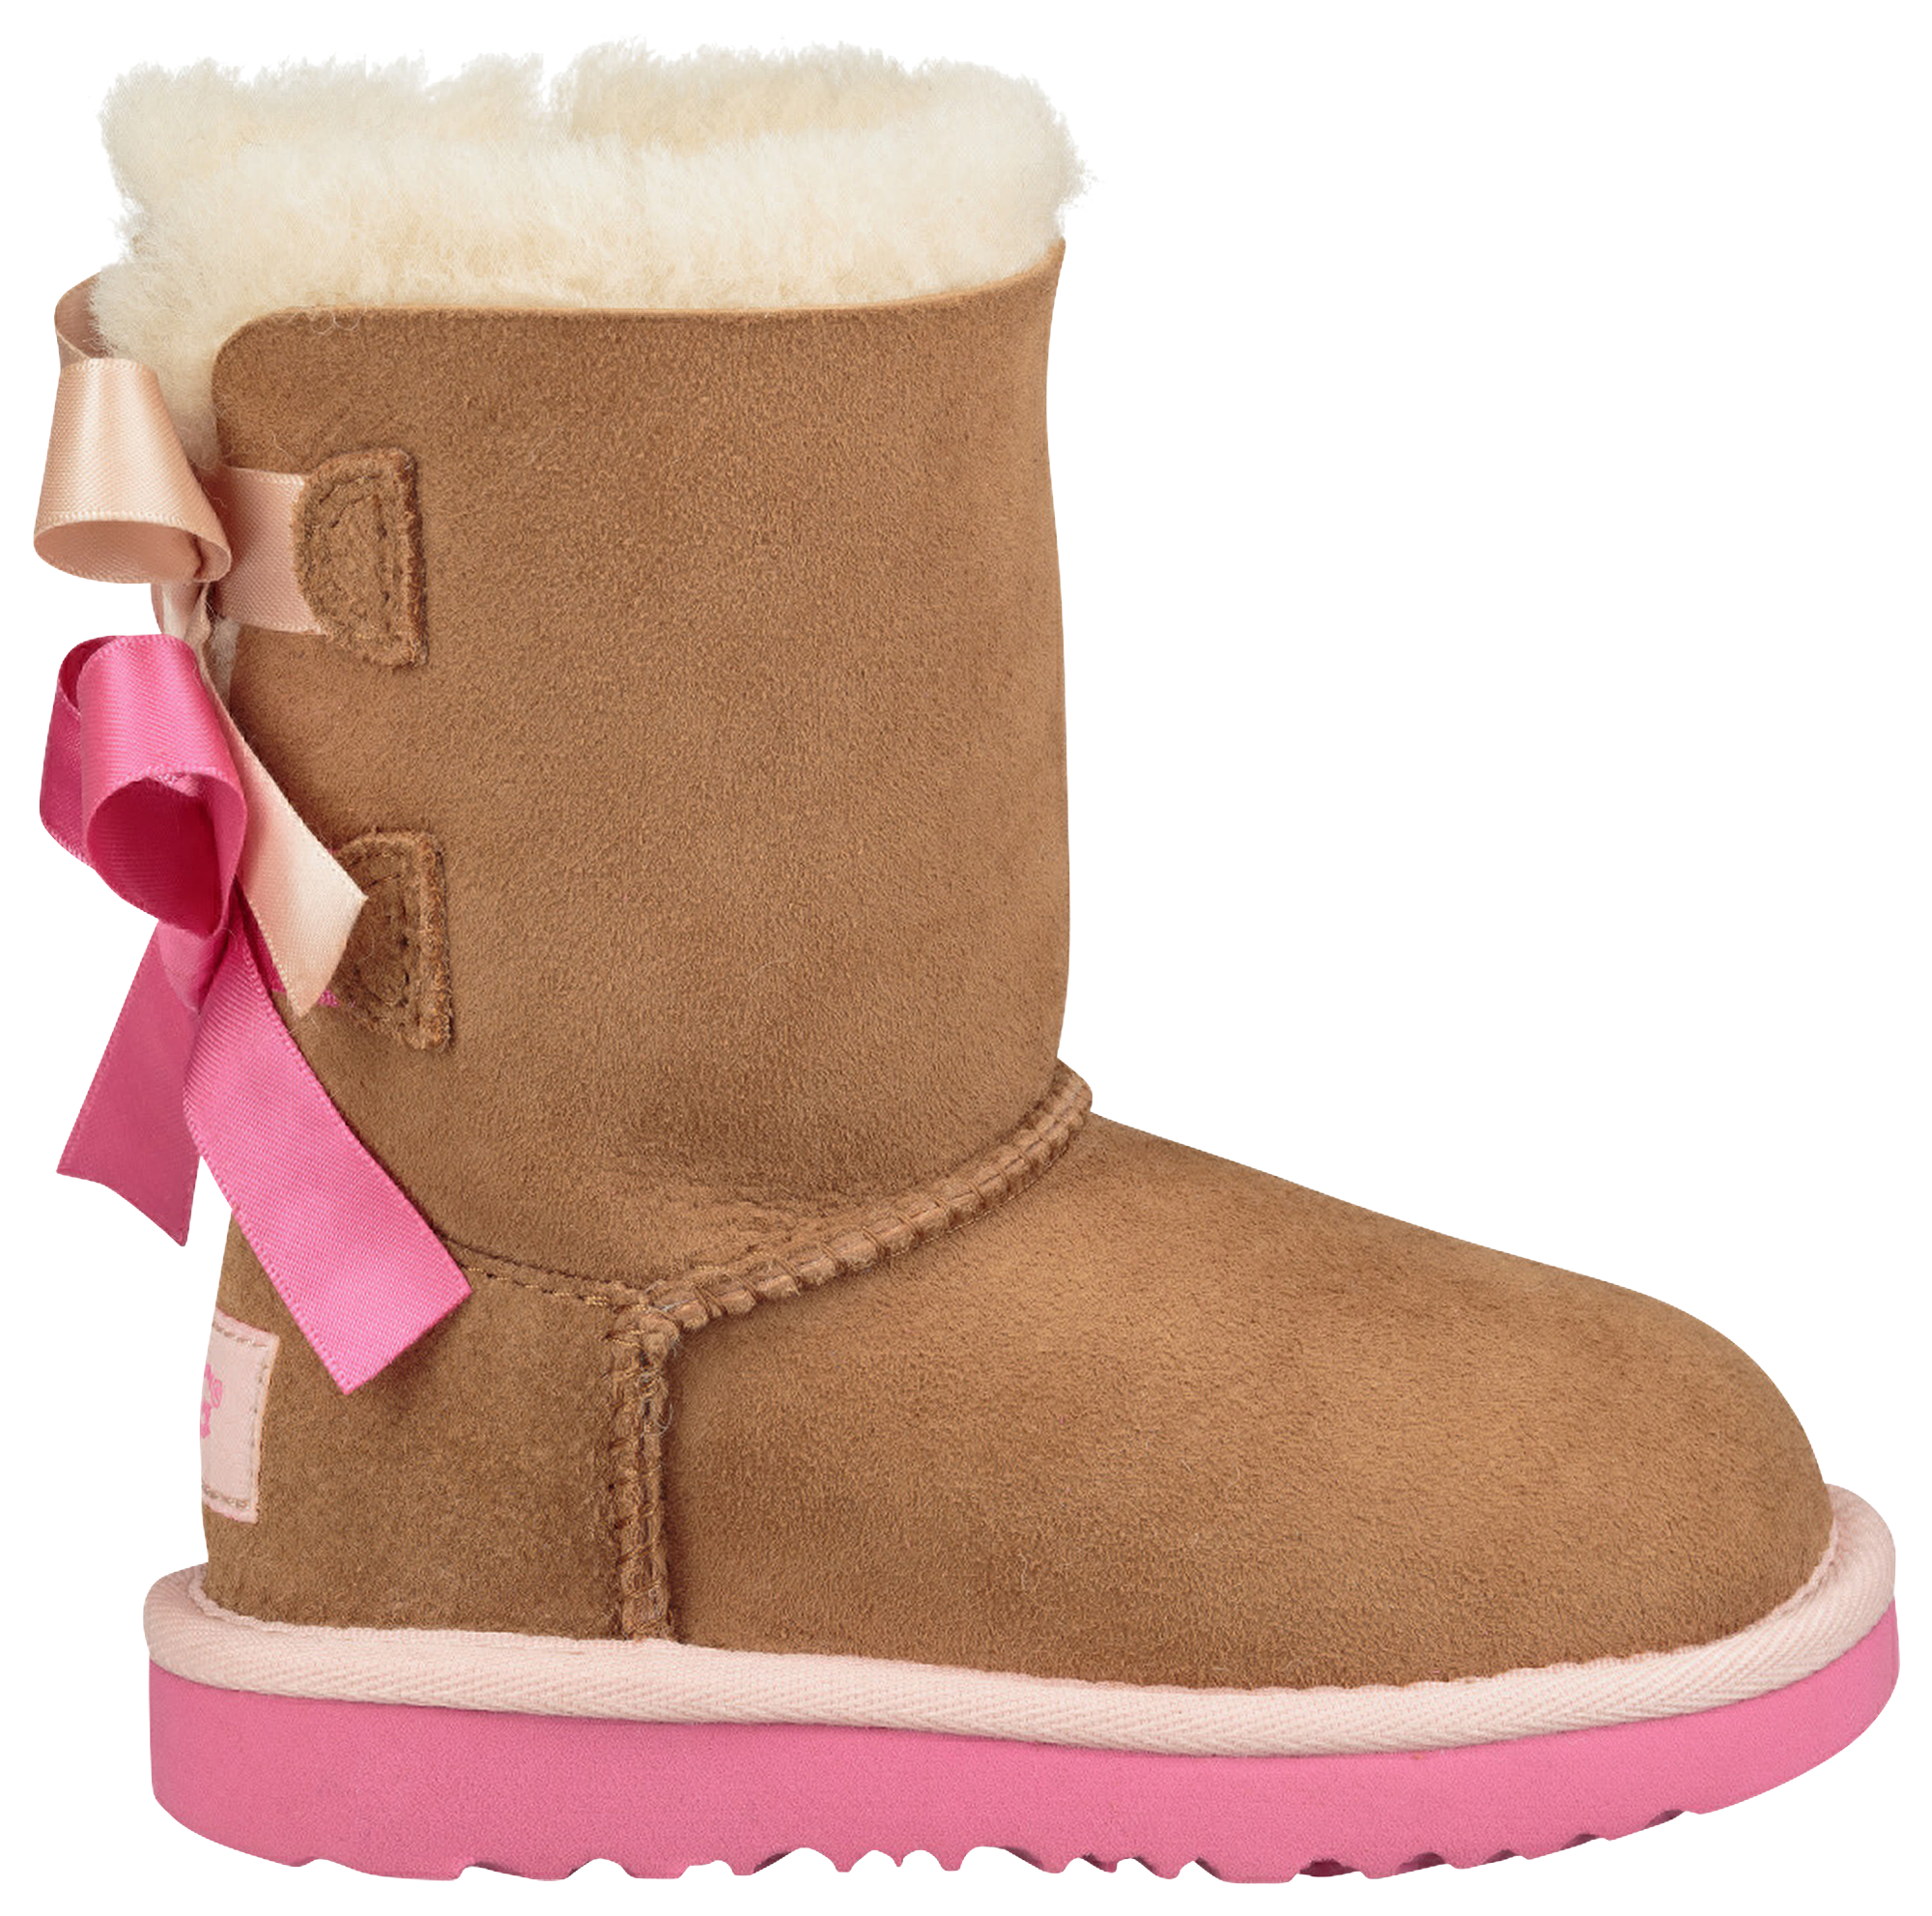 pink bailey bow uggs toddler